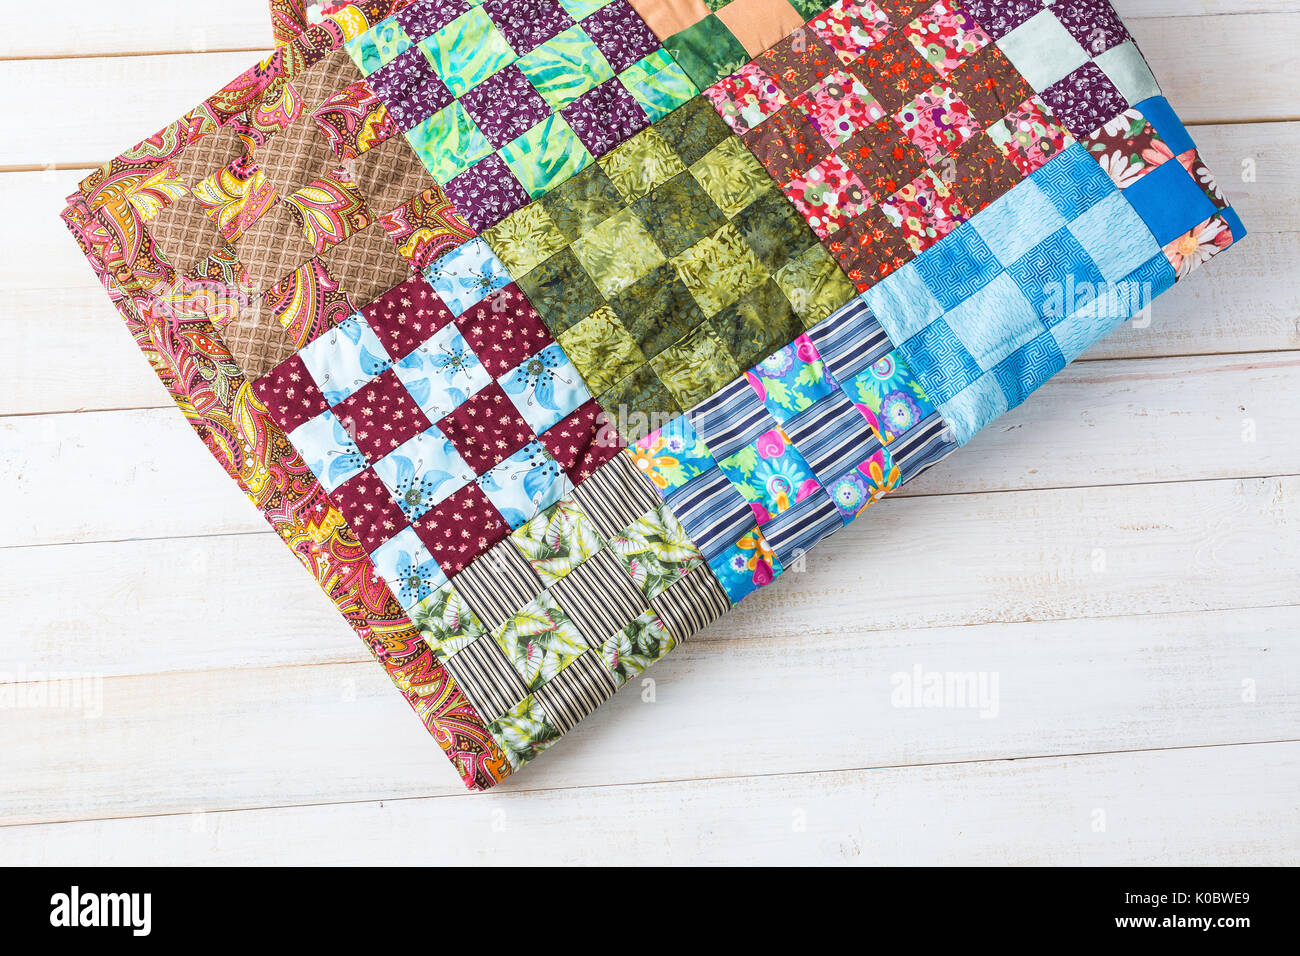 comfort, accessories, art, creation, style concept - original handiwork in asian traditions made of little textile squares in red, green and blue shades with such prints as flowers, leaves and strips Stock Photo